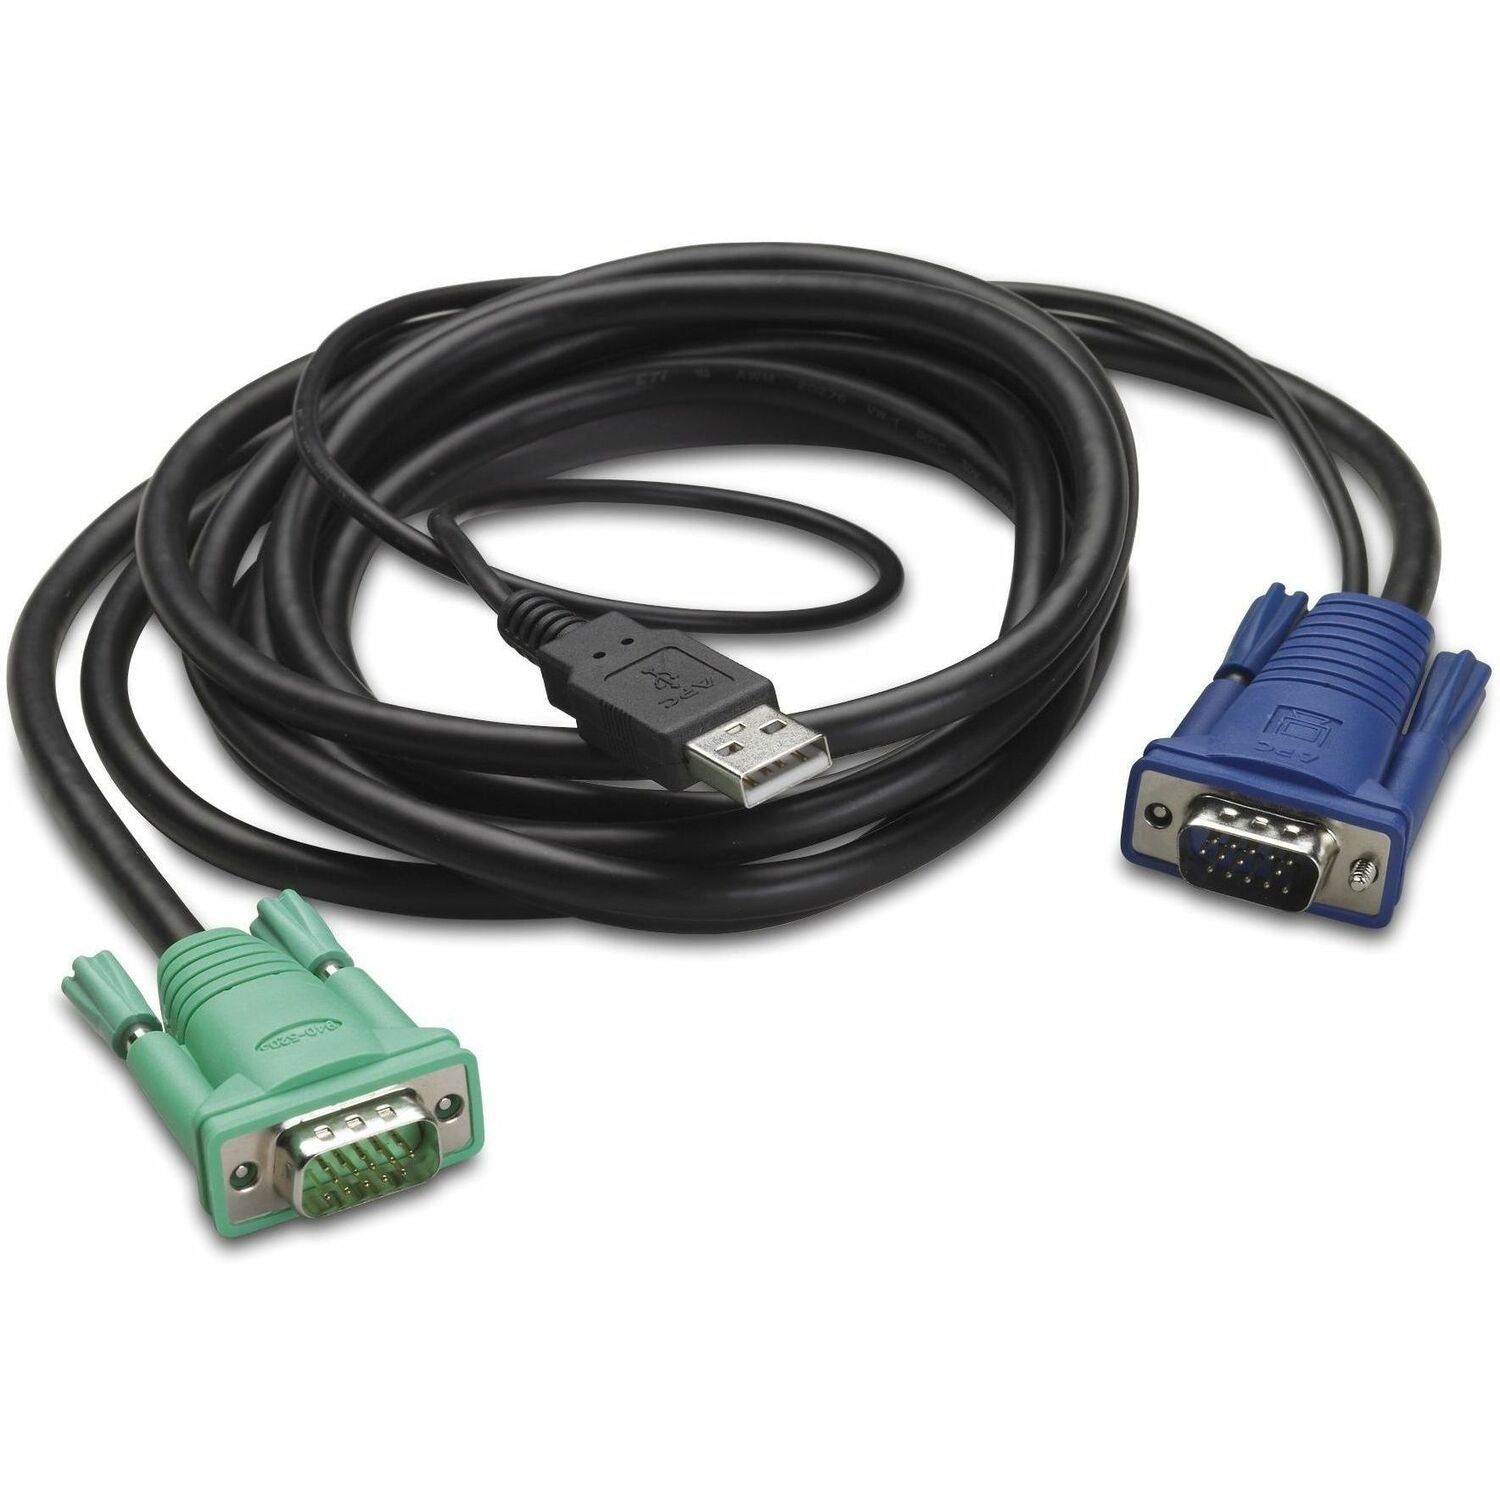 APC by Schneider Electric Integrated Rack LCD/KVM USB Cable - 6ft (1.8m) - AP5821